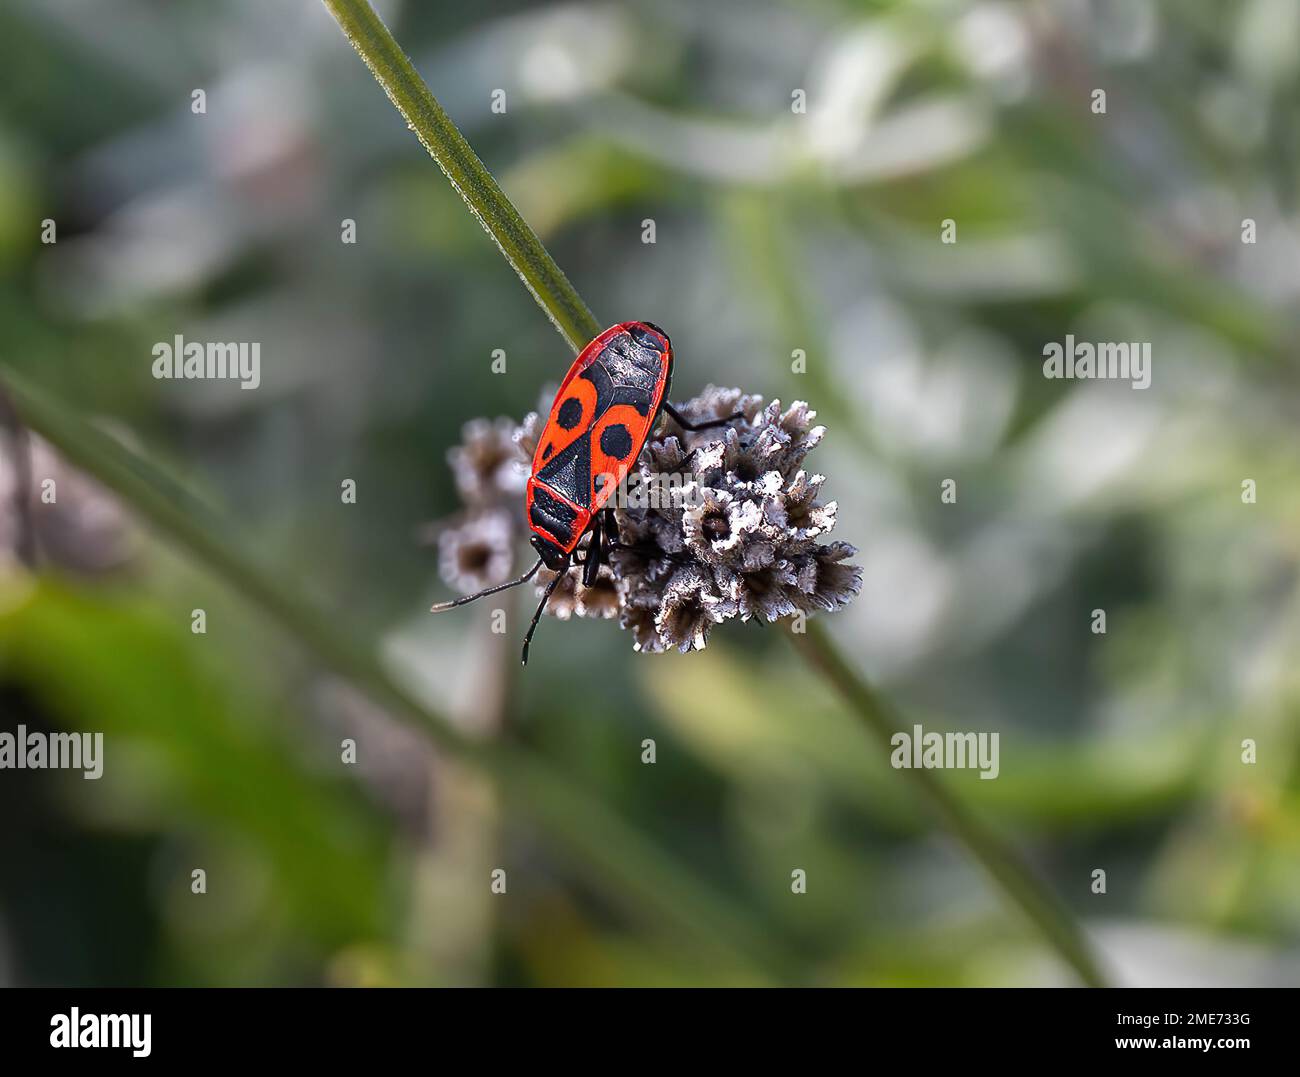 A closeup shot of a European firebug on a flower isolated on a blurred background Stock Photo